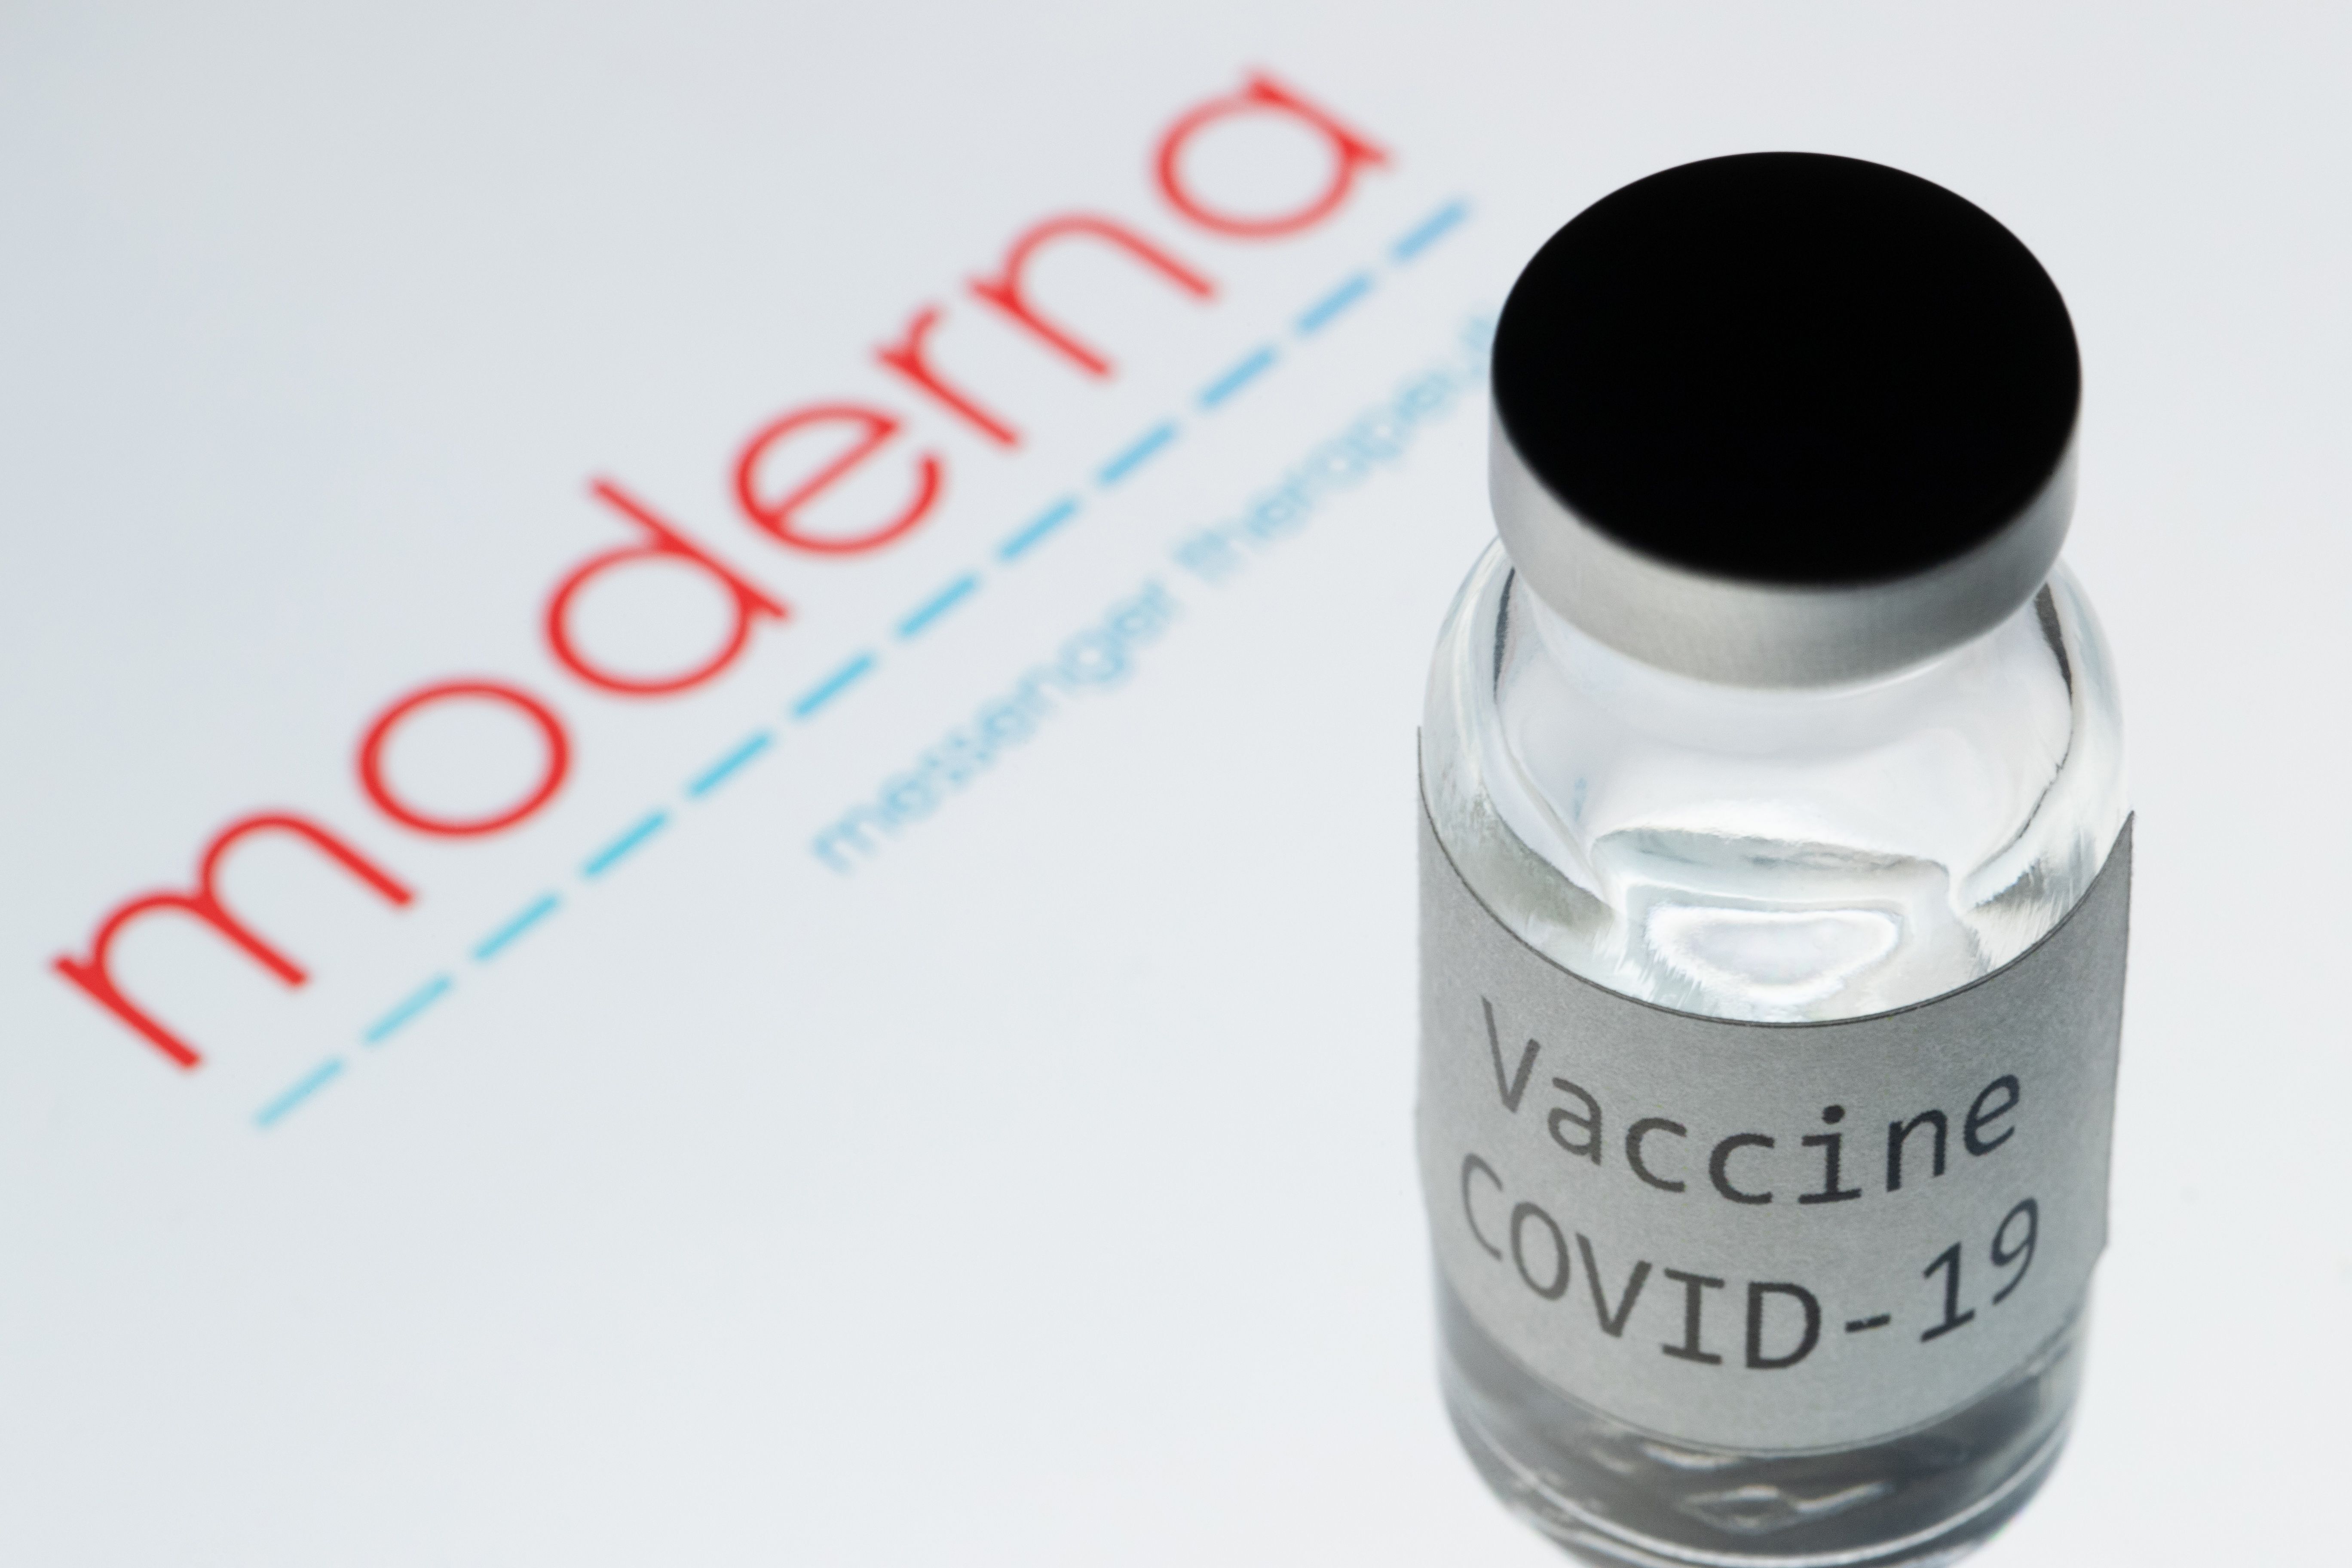 A photo shows a bottle reading “Vaccine Covid-19” next to a logo of the Moderna biotech company, which is developing a coronavirus vaccine.